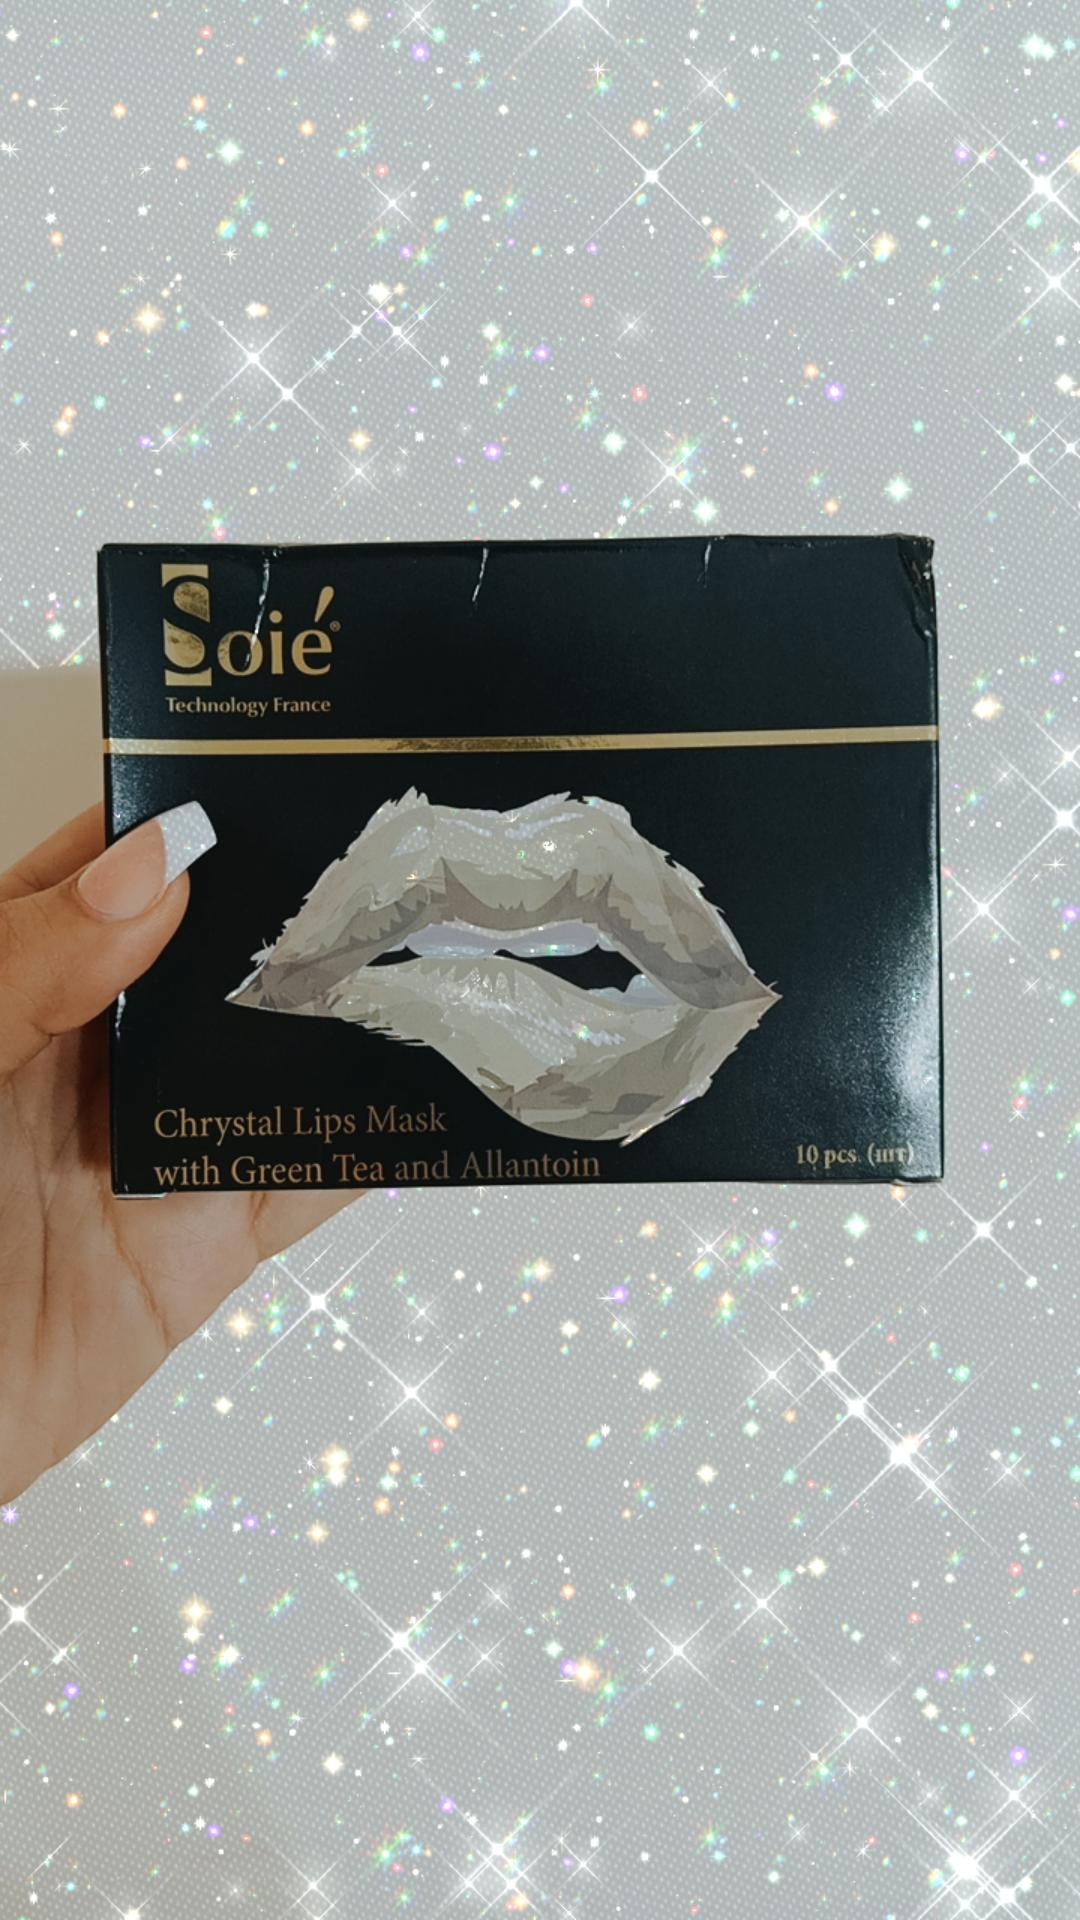 Soie technology France Chrystal lip mask With Green tea and Allantion